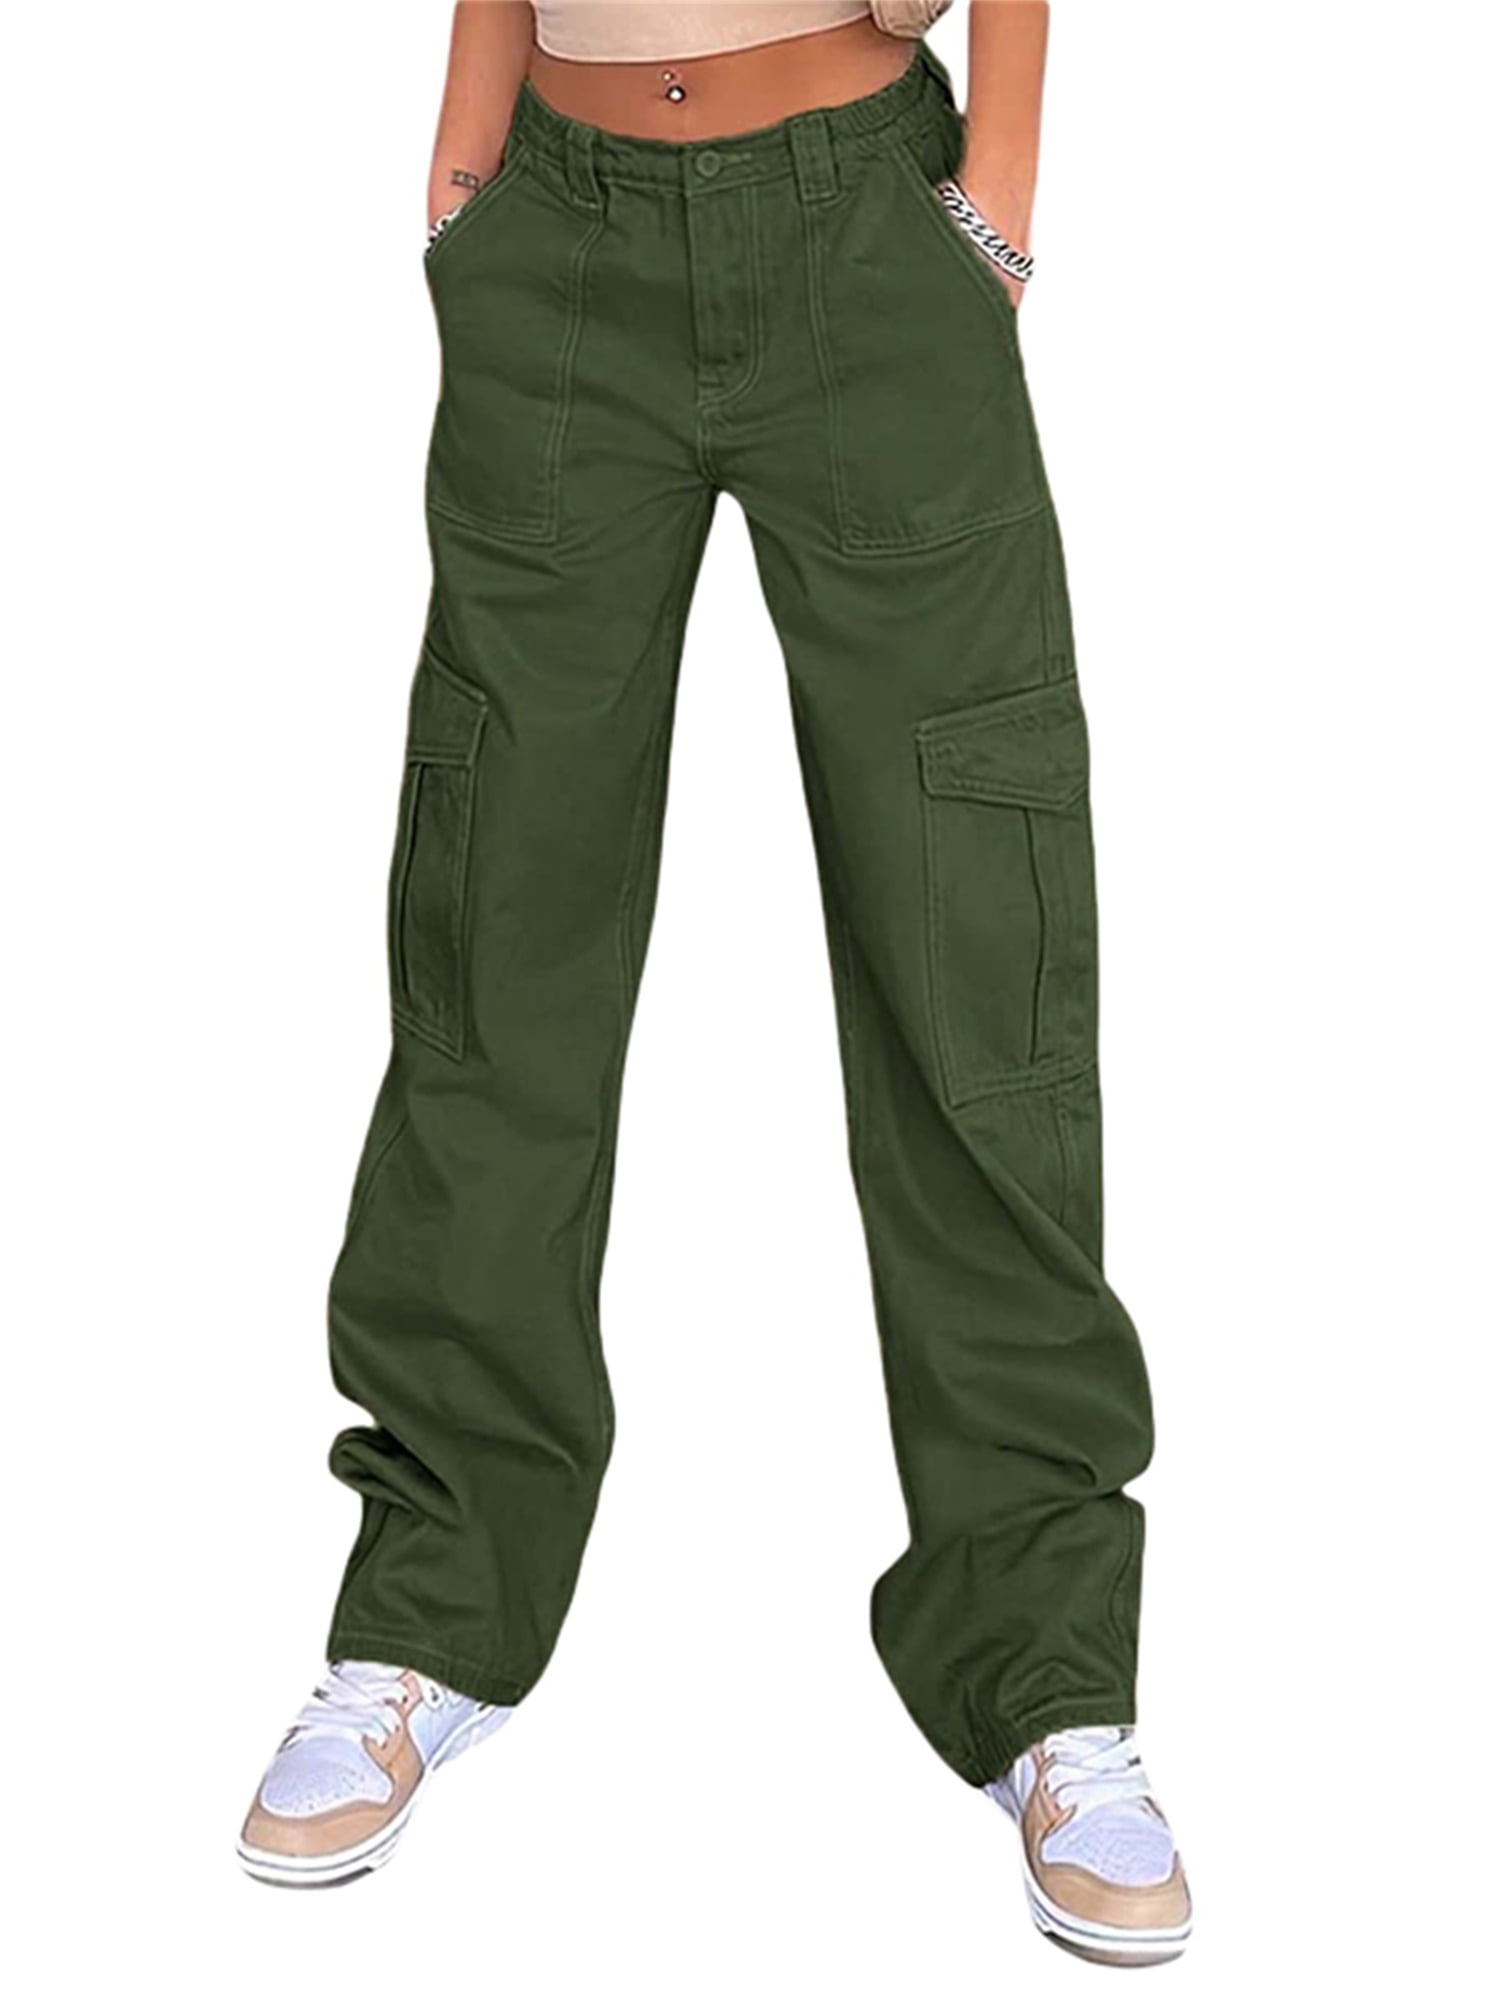 MS SHEA MAY Aesthetic Fashion Baggy Cargo Pants for Women Loose Wide  Straight Leg Grunge Clothing Punk E-Girl Harajuku Streetwear, Army Green at   Women's Clothing store